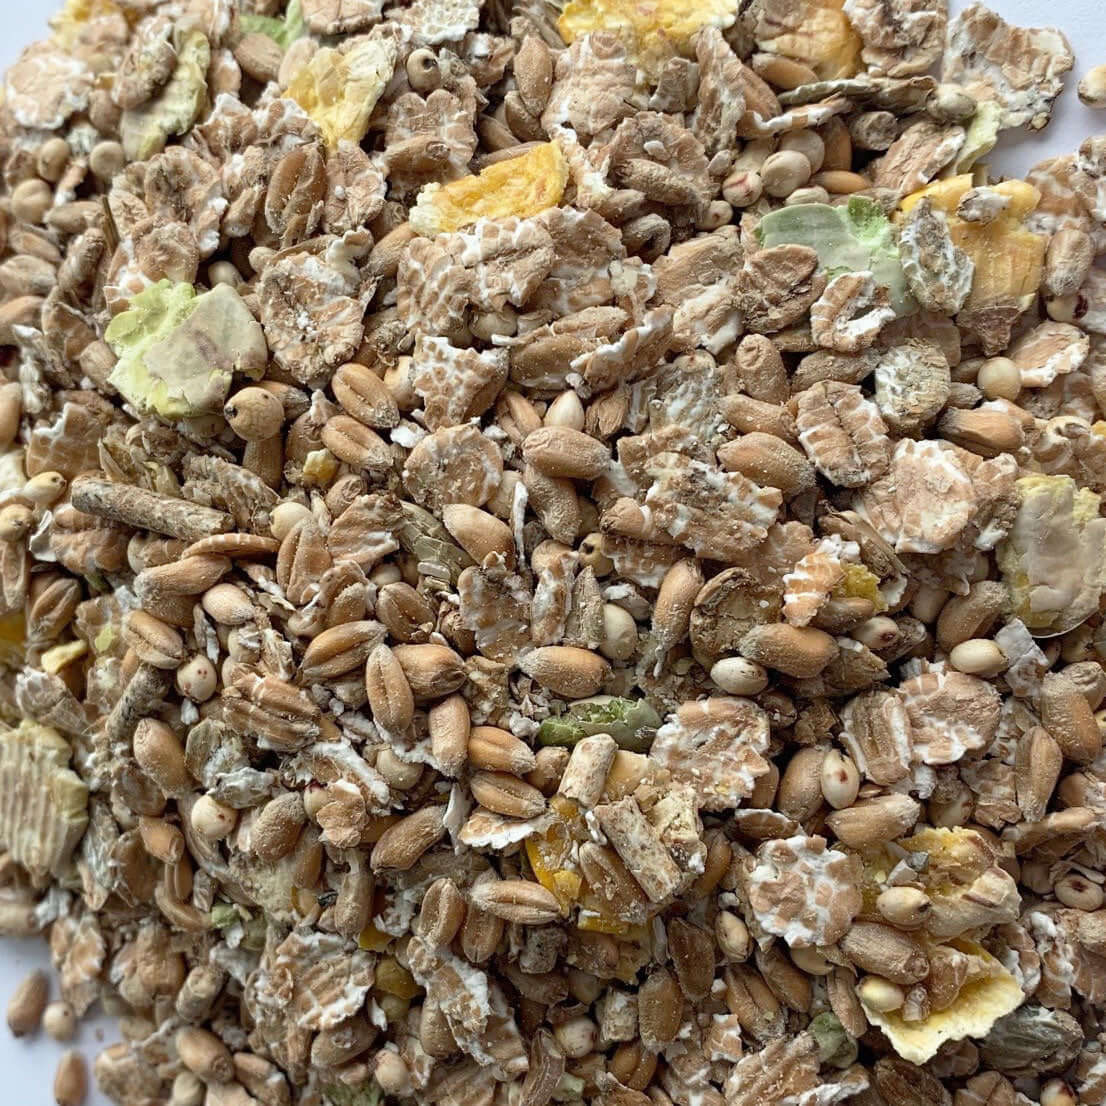 A mix of grains and cereals suitable for ducks, geese and swans.